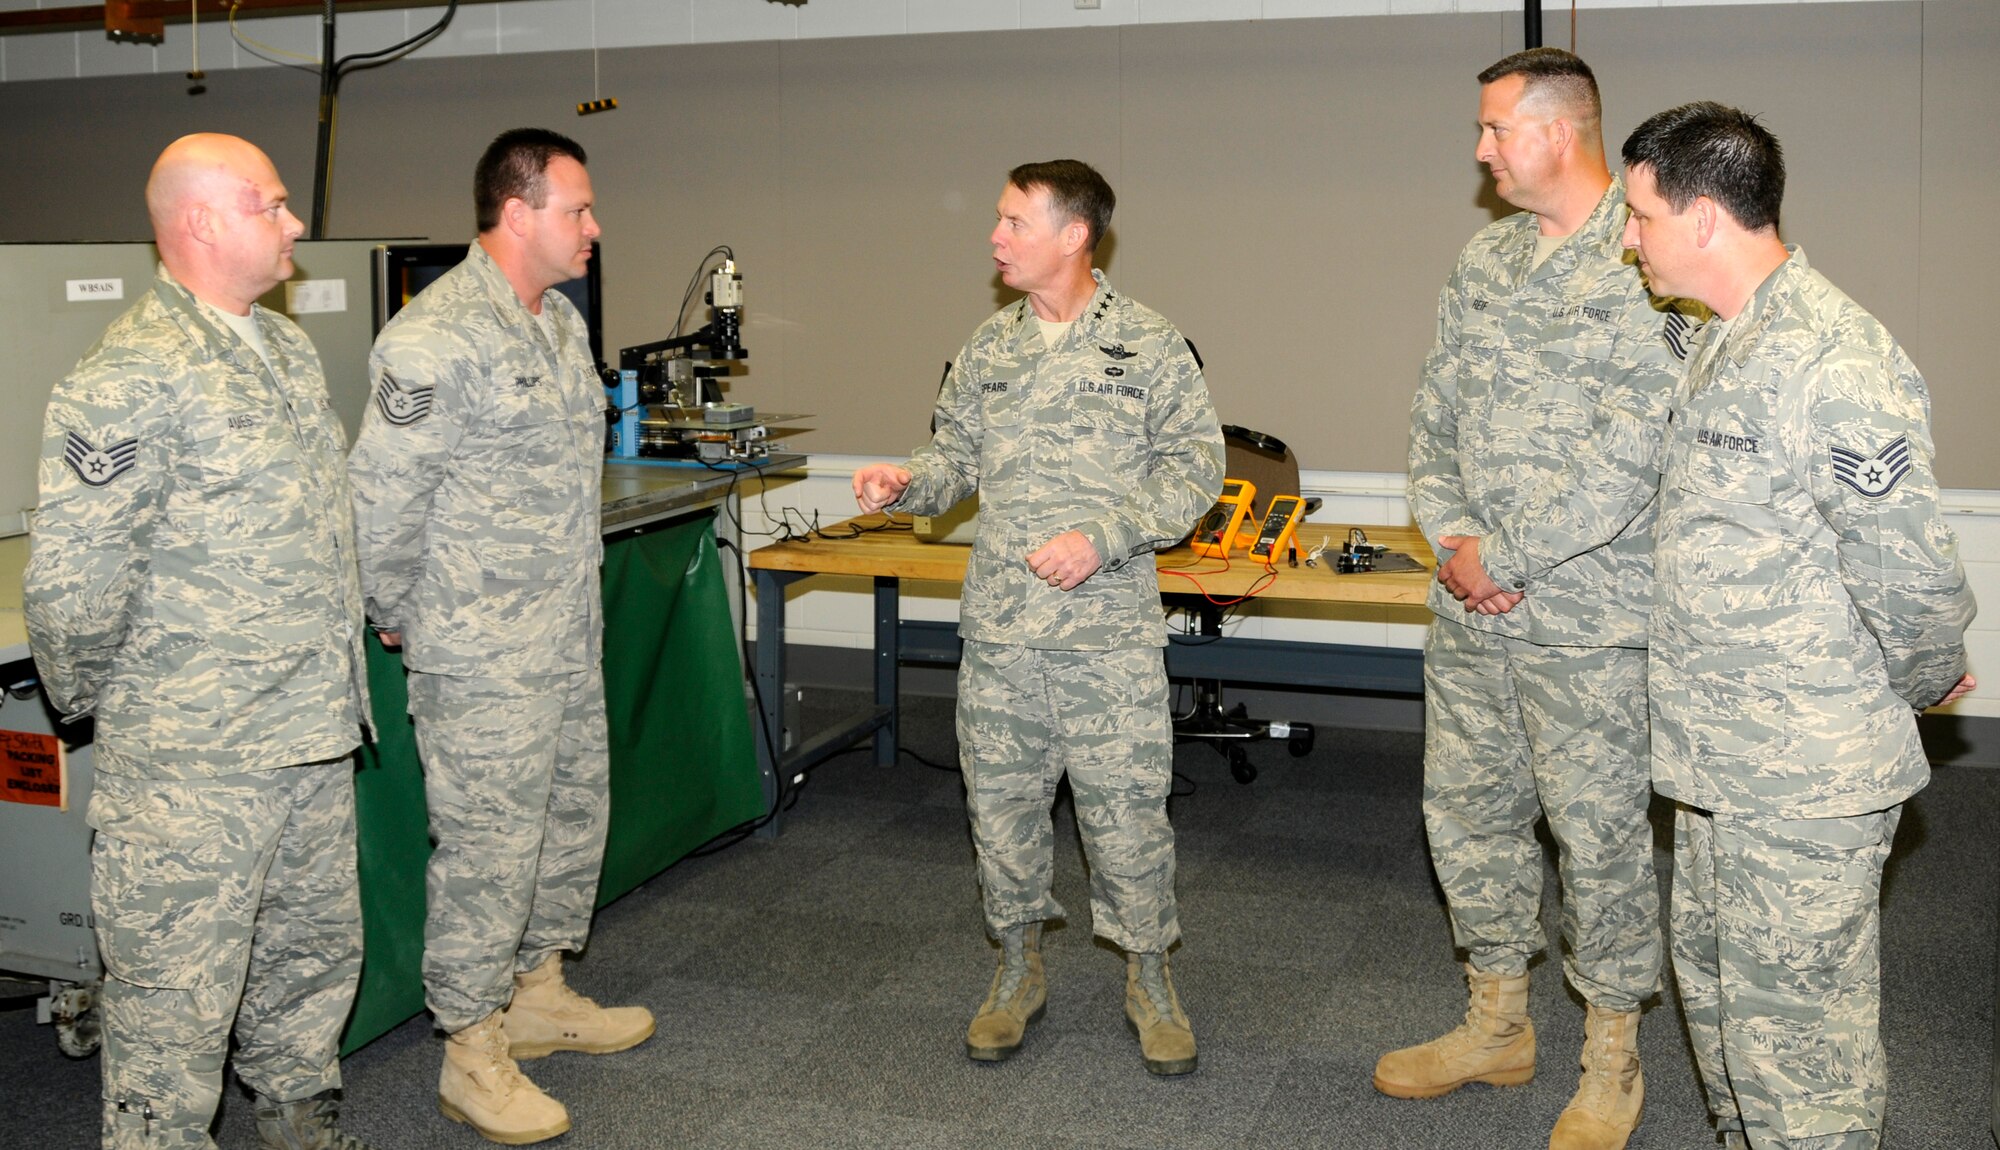 Lt. Gen. Glenn Spears, 12th Air Force and Air Forces Southern commander, middle, visits with members of the 188th Fighter Wing Avionics Intermediate Station, from left, Staff Sgt. Jeffery Ames, Tech Sgt. Derrick Phillips, Tech Sgt. Michael Reif and Staff Sgt. Robert Craise. The 188th AIS developed repairs that saved the Air Force approximately $1.3 million. (U.S. Air Force photo by Senior Master Sgt. Dennis Brambl/188th Fighter Wing Public Affairs). 